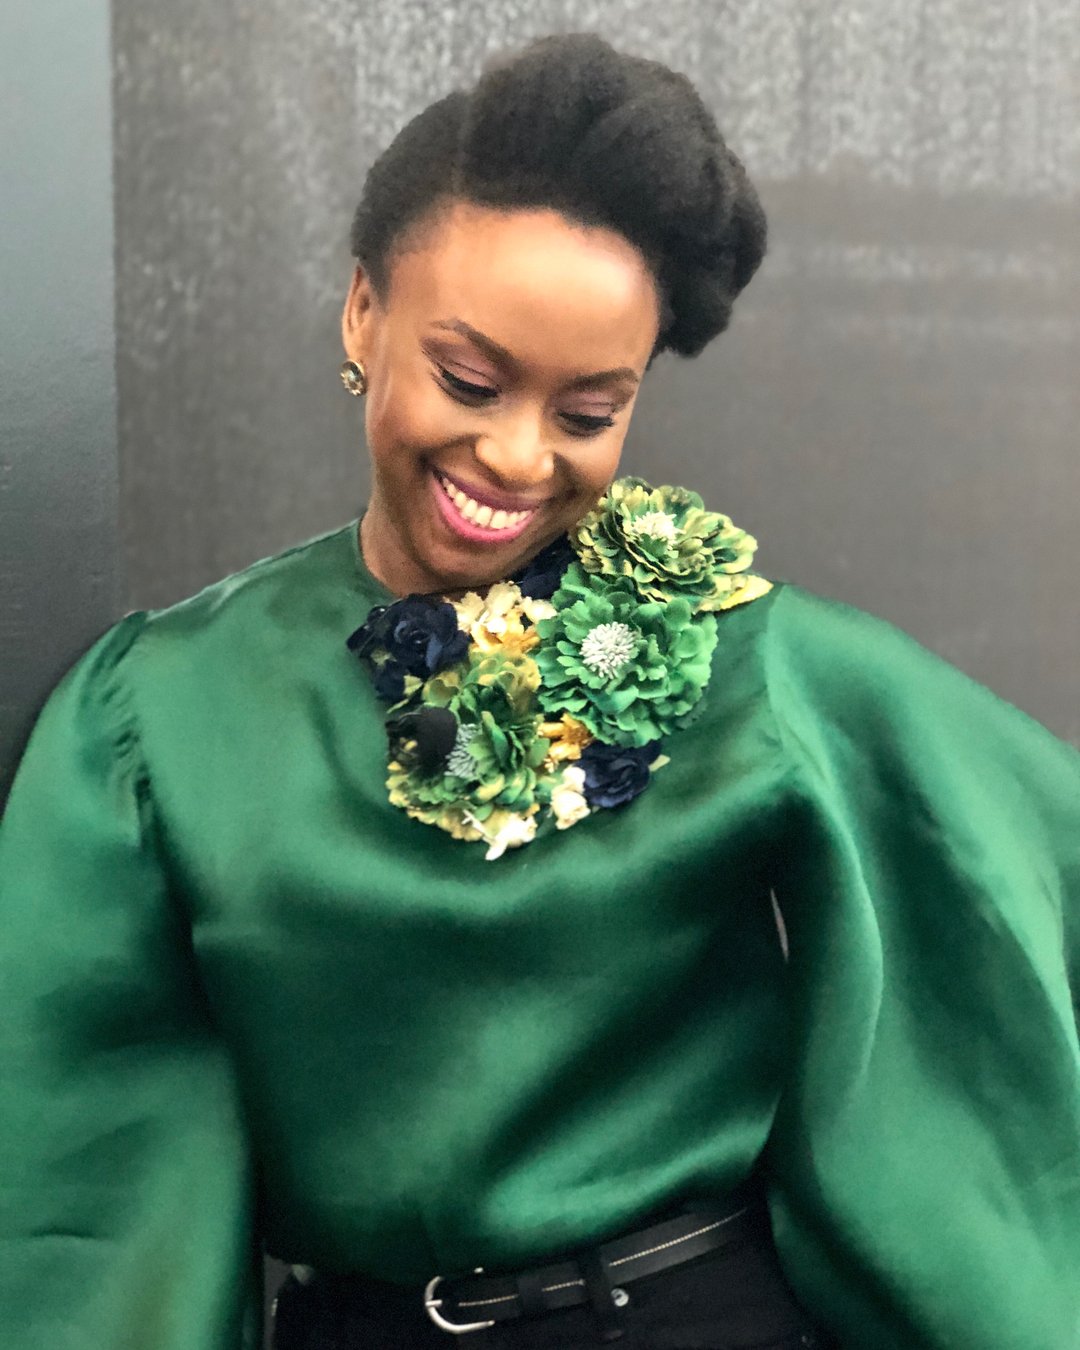 “I’m still thinking about how I feel about Nigeria” Chimamanda Adichie says after being called a demon